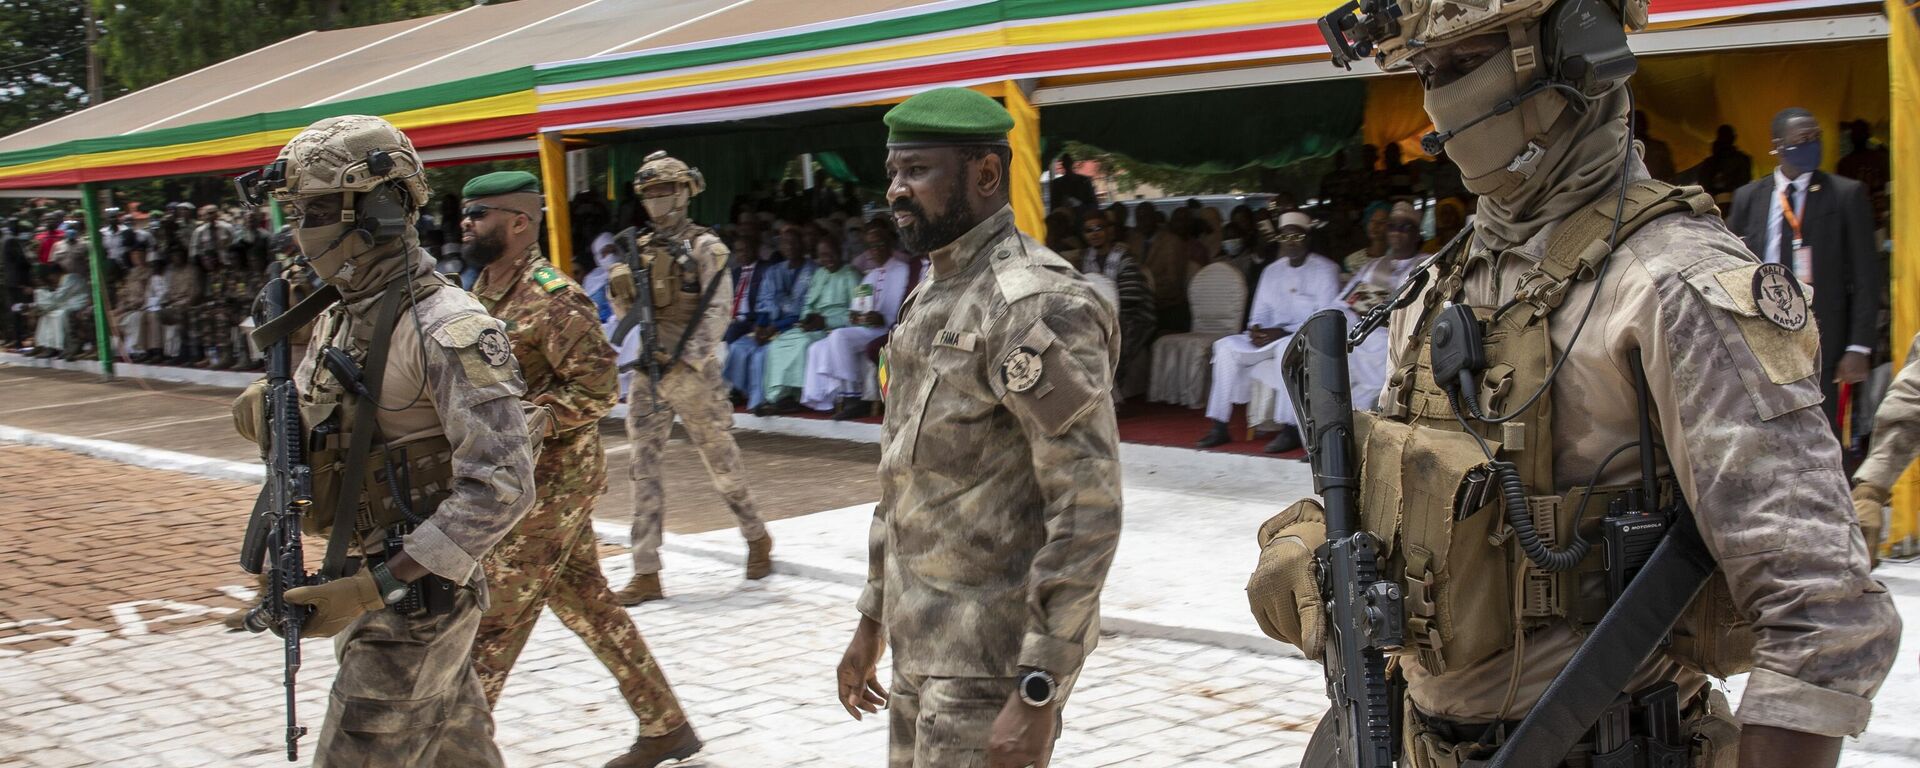 Leader of Mali's ruling junta Lt. Col. Assimi Goita, center, attends an independence day military parade in Bamako, Mali on Sept. 22, 2022. - Sputnik Africa, 1920, 02.07.2023